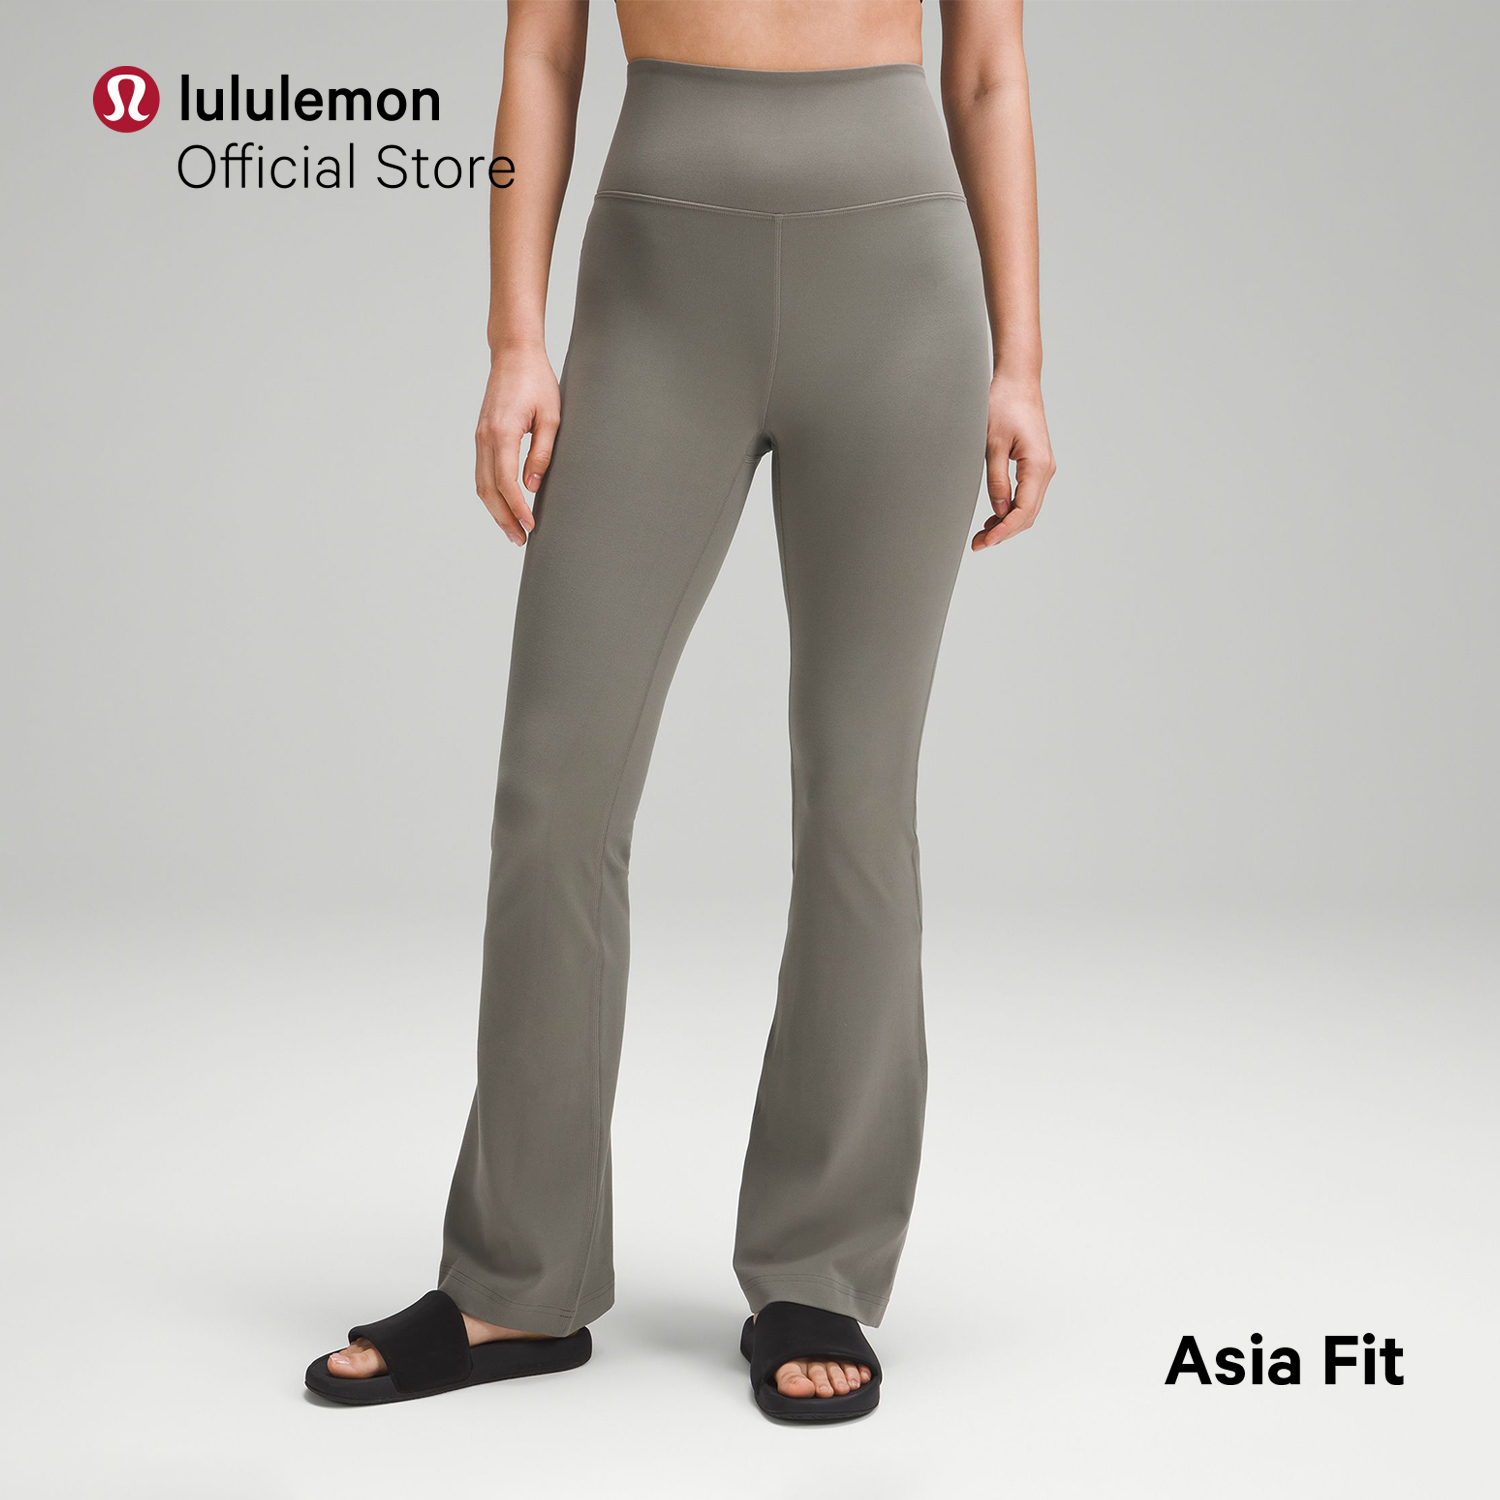 Lululemon Groove Pants Asia Fit, Women's Fashion, Activewear on Carousell